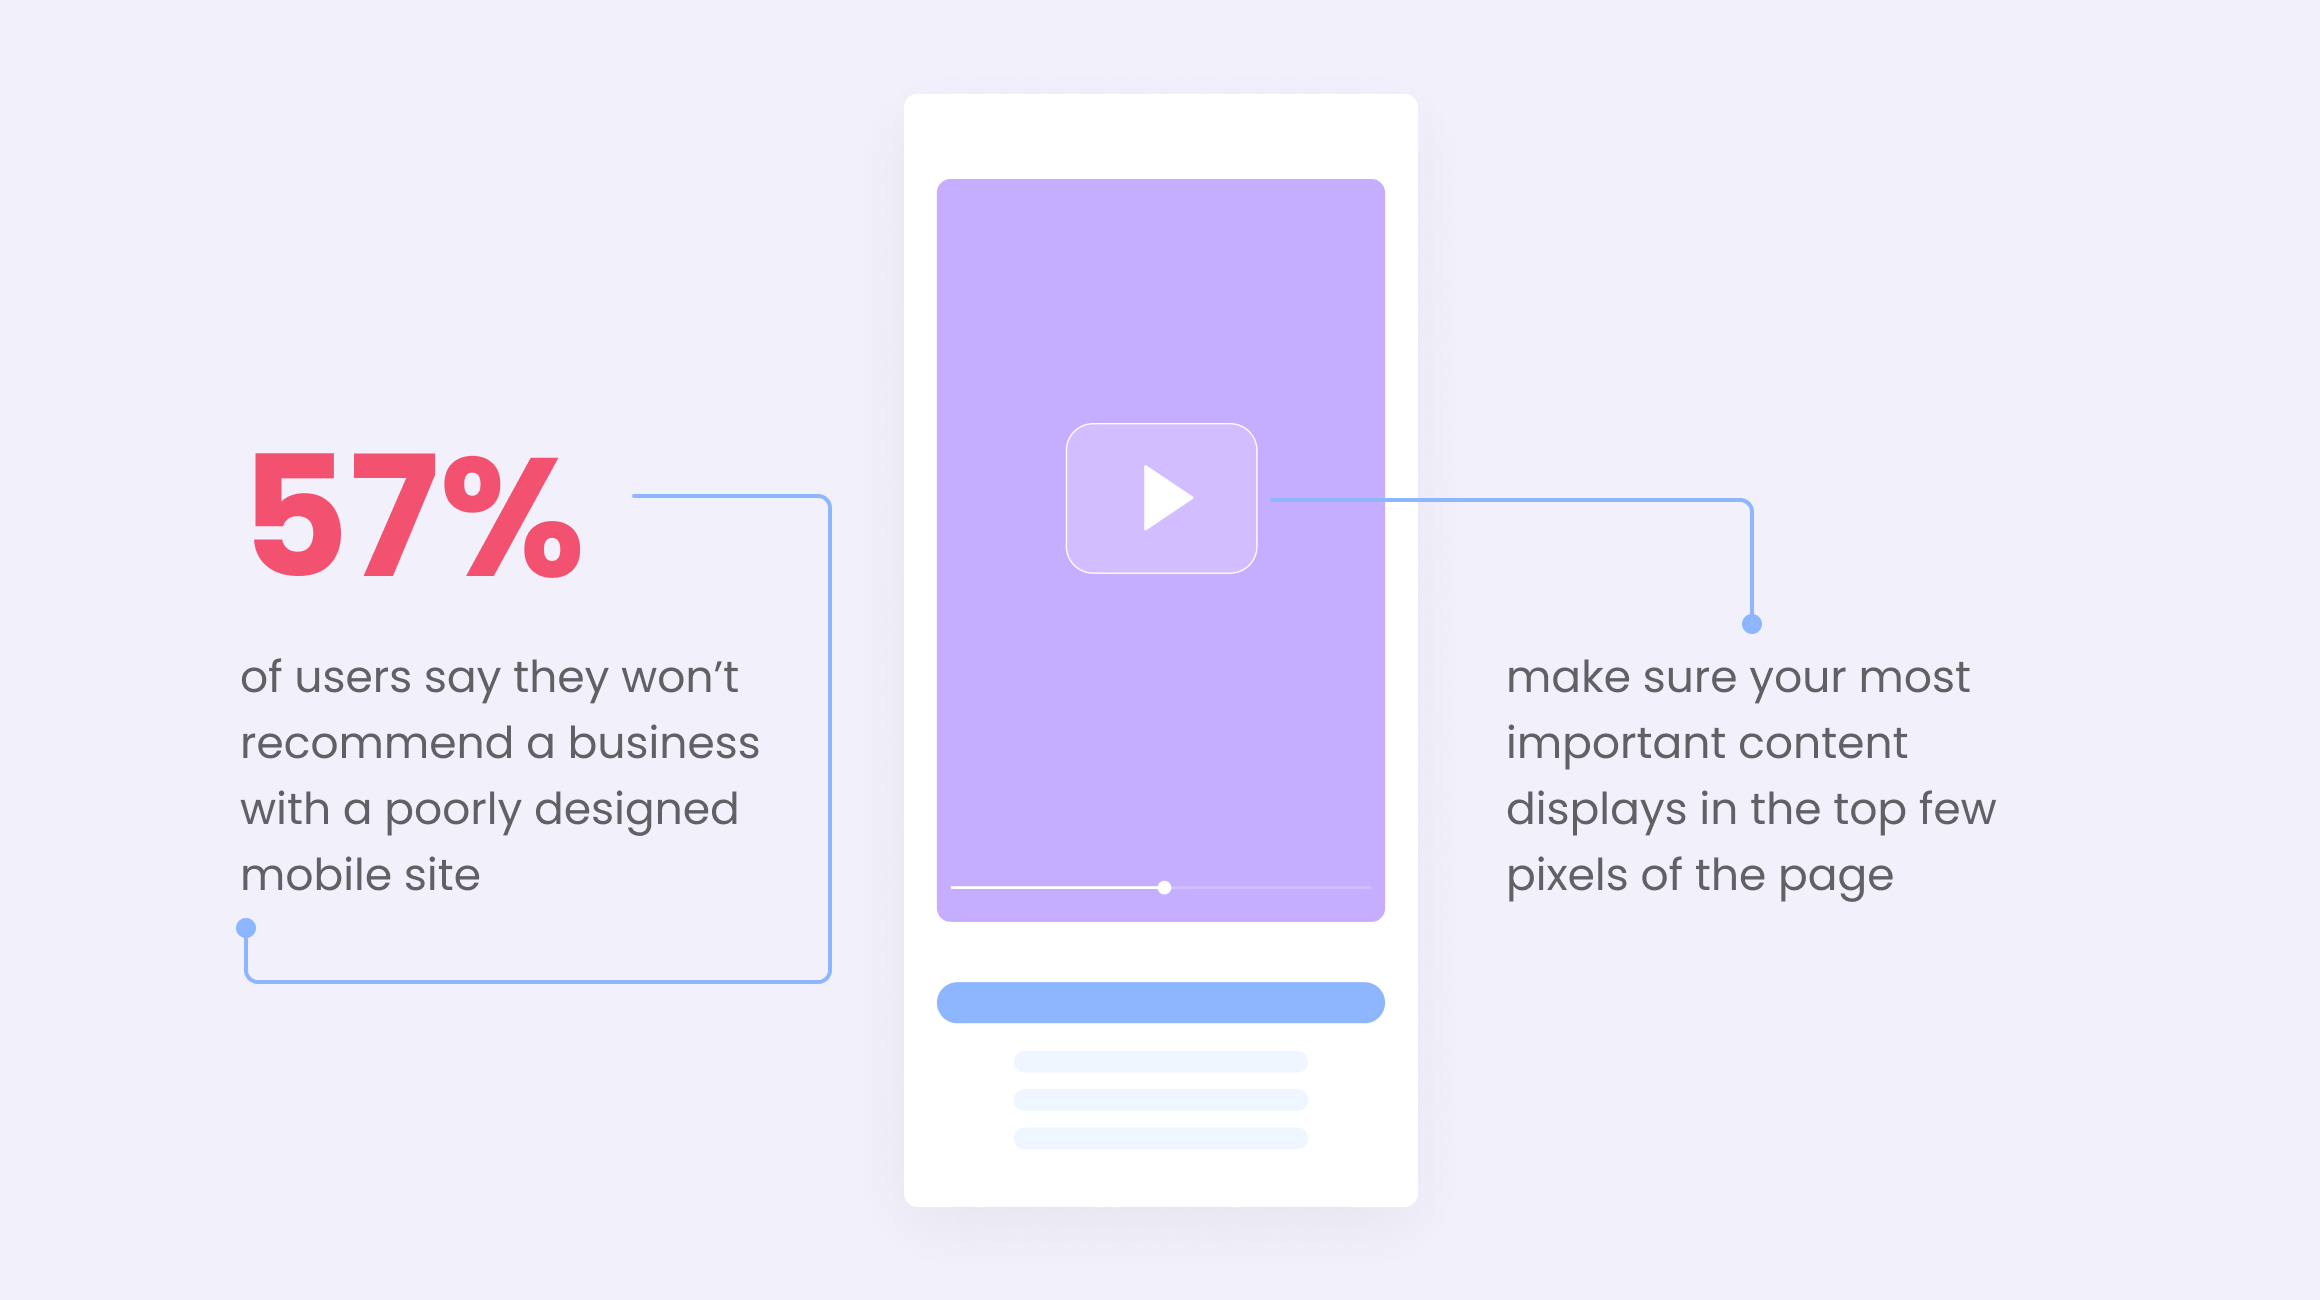 57% of users won’t recommend a business with a poor mobile website design.